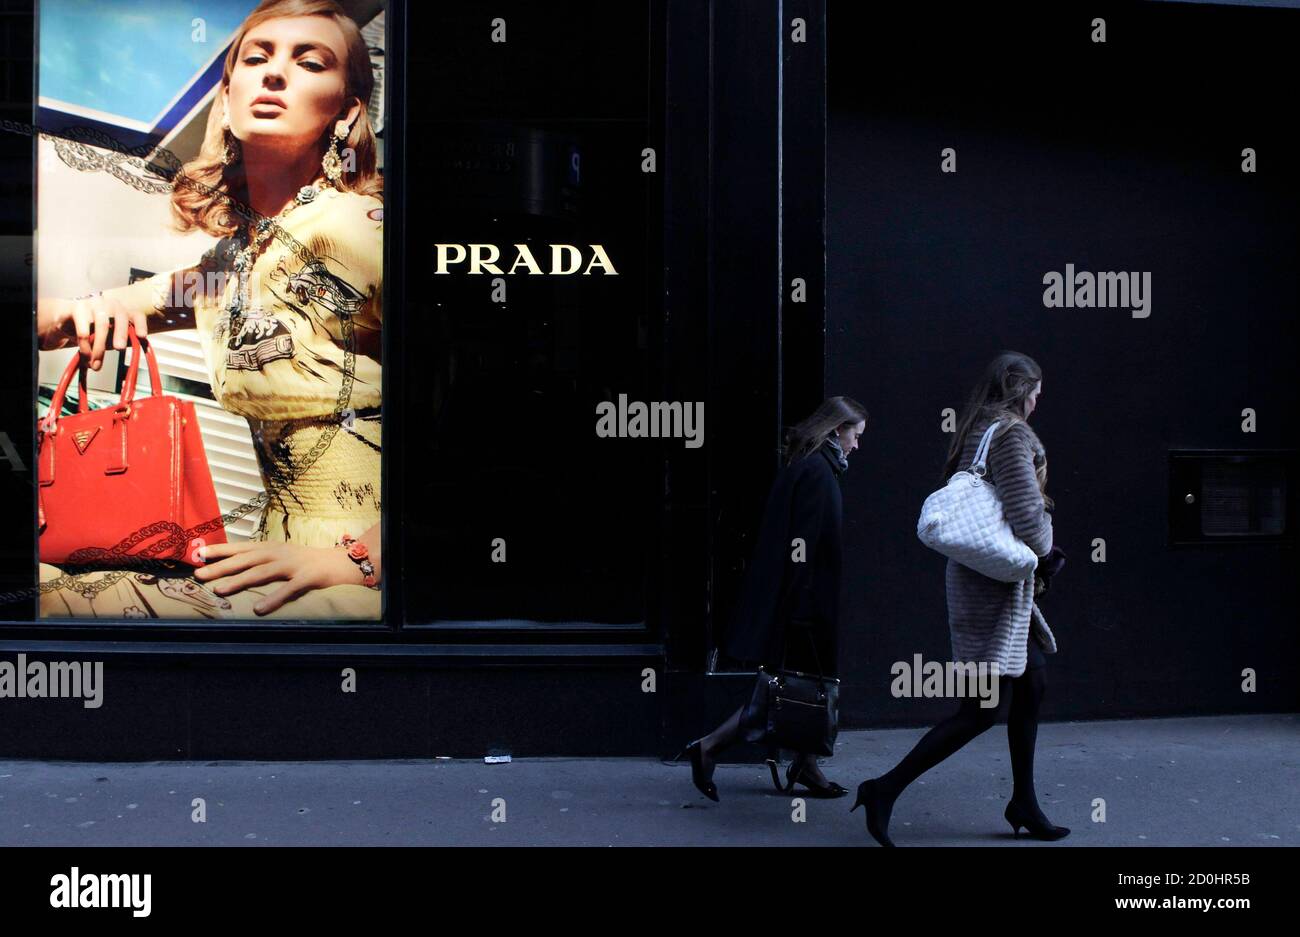 People walk past a Prada store on Grafton Street in central Dublin, January  26, 2012. Greece, Portugal, Spain, and to a lesser extent, Ireland, still  face a year or two of economic